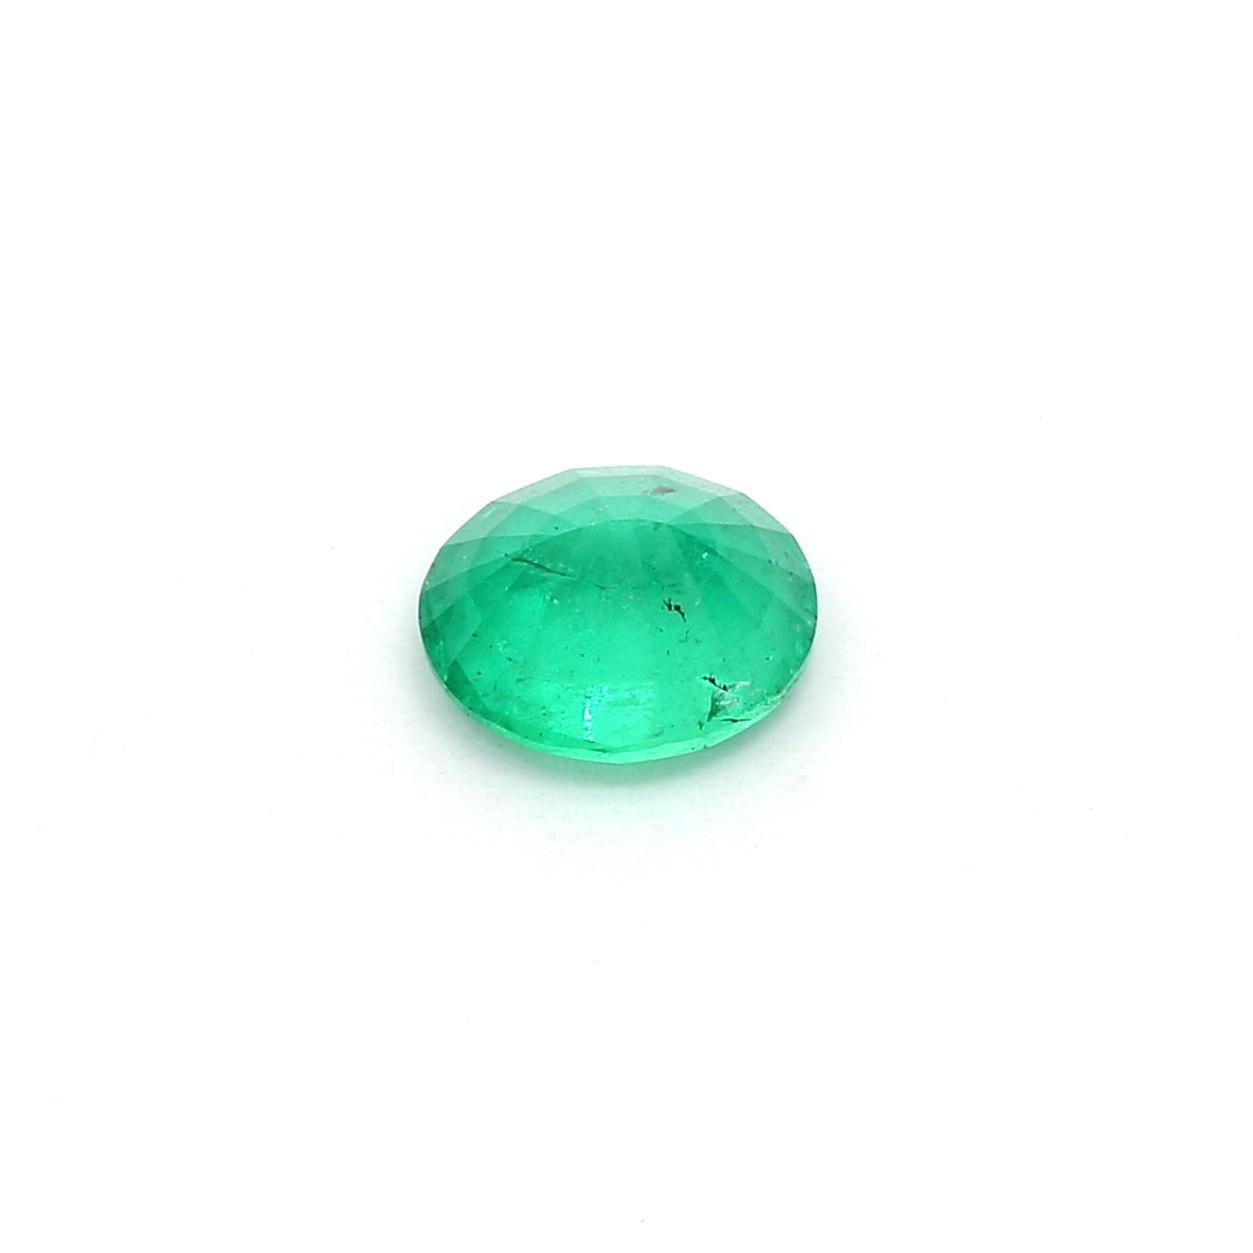 An amazing Russian Emerald which allows jewelers to create a unique piece of wearable art.
This exceptional quality gemstone would make a custom-made jewelry design. Perfect for a Ring or Pendant.

Shape - Oval
Weight - 1.01 ct
Treatment -